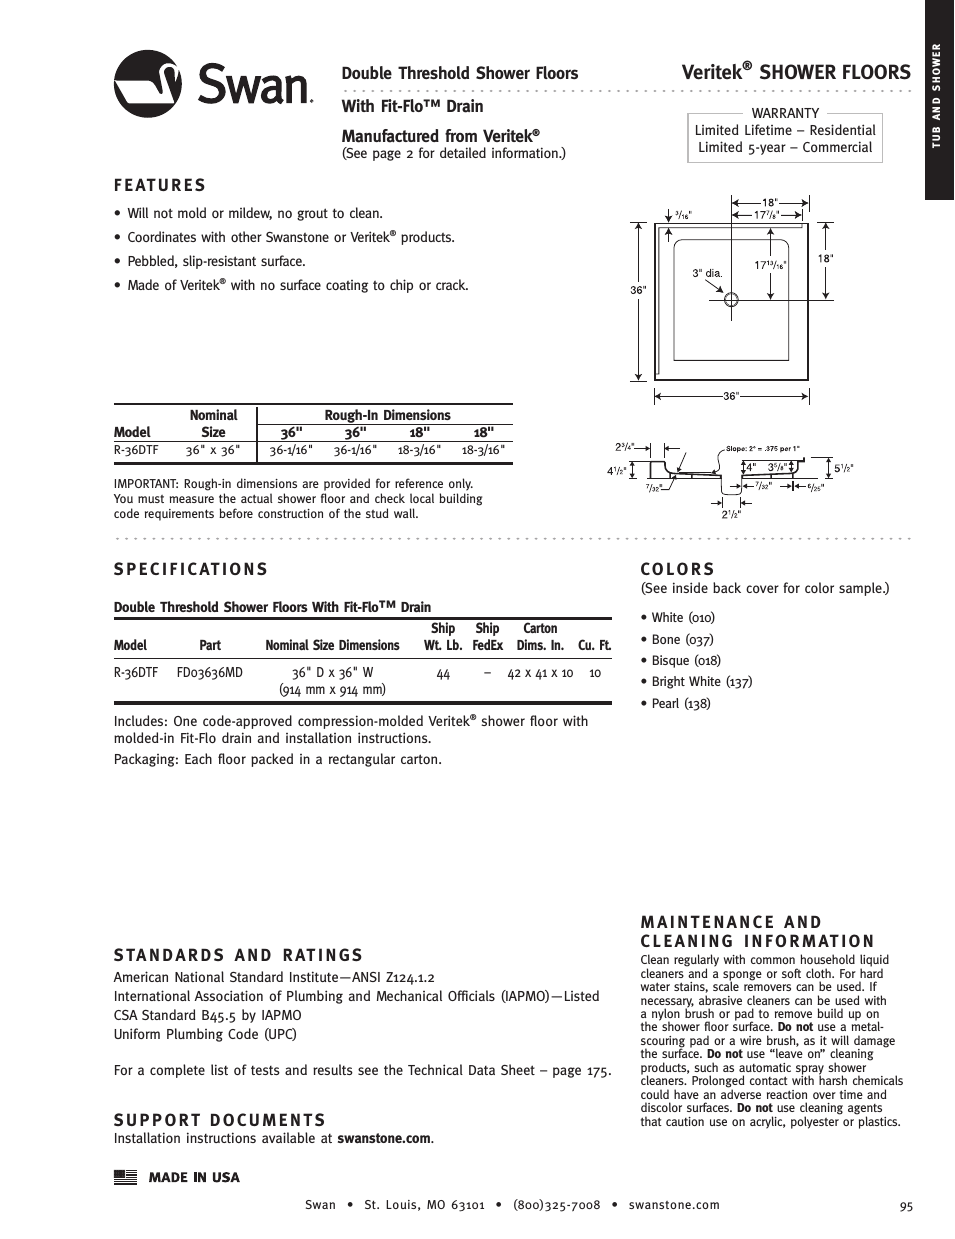 R-36DTF - Specification